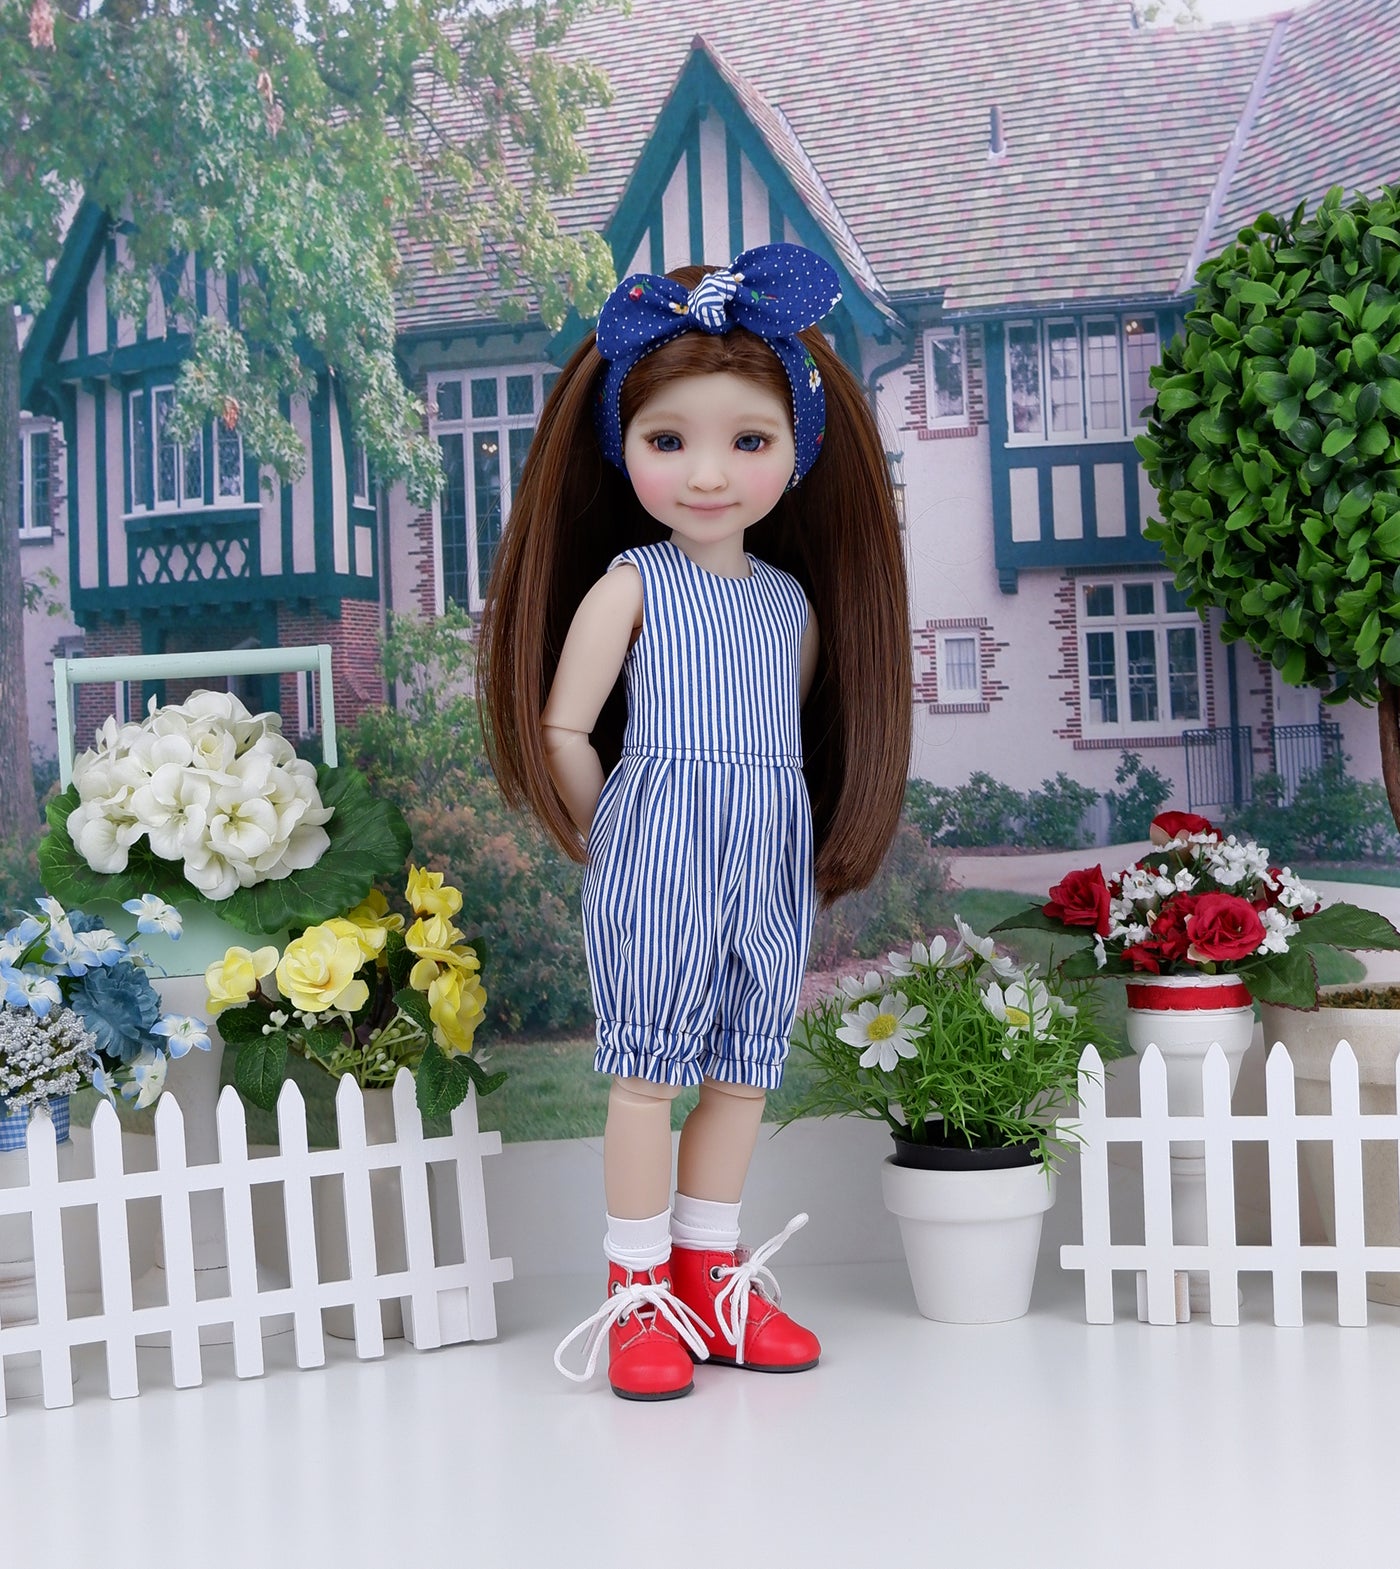 Swiss Daisy - romper and apron with boots for Ruby Red Fashion Friends doll